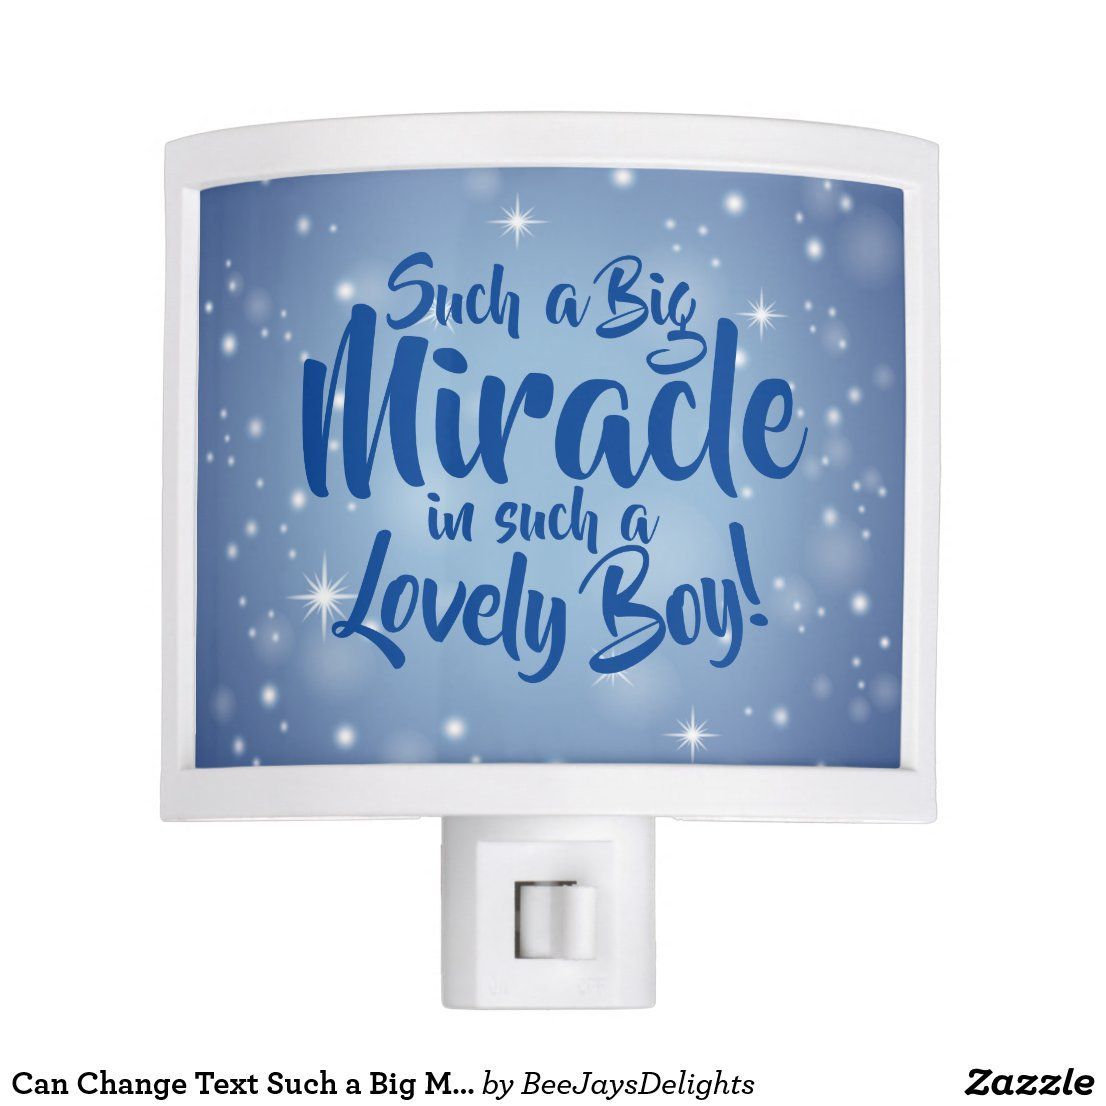 Can Change Text Such a Big Miracle in Lovely Boy Night Light | Zazzle.com -   17 beauty Boys night ideas